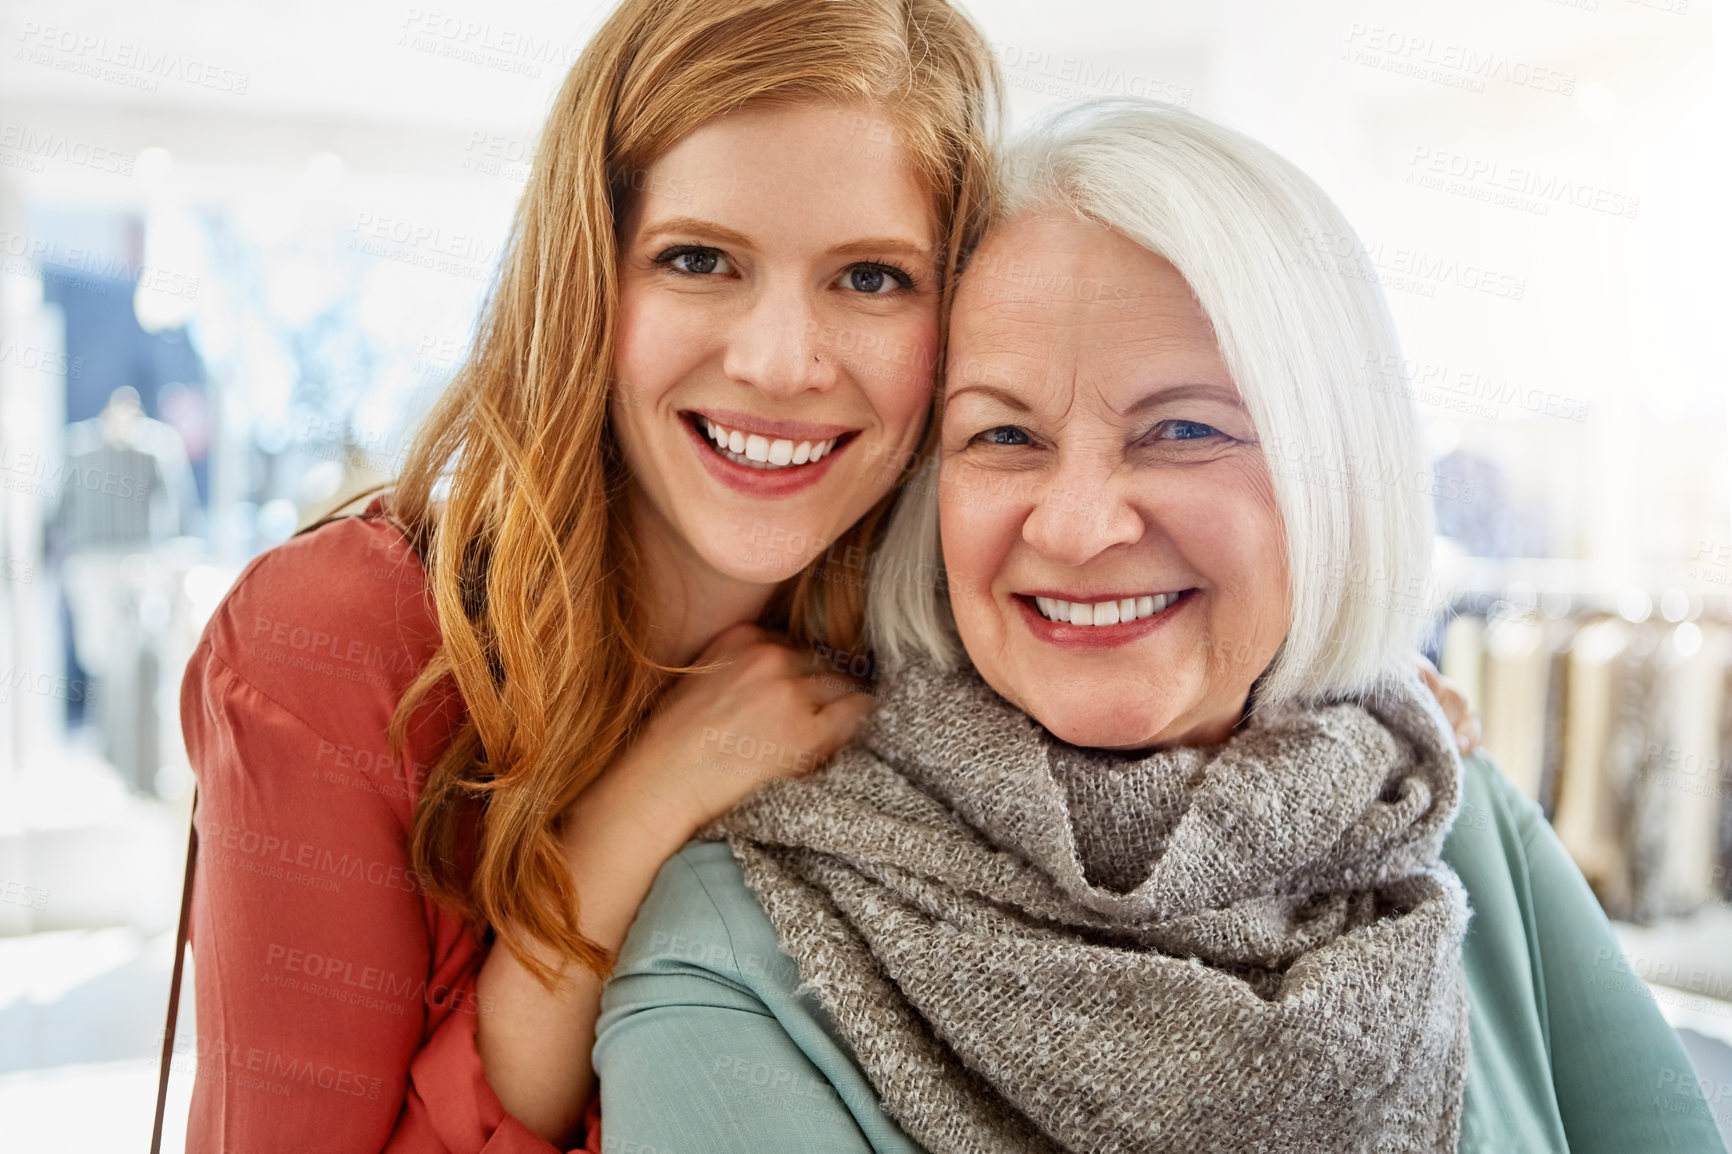 Buy stock photo Shot of a happy young woman standing behind her senior mother